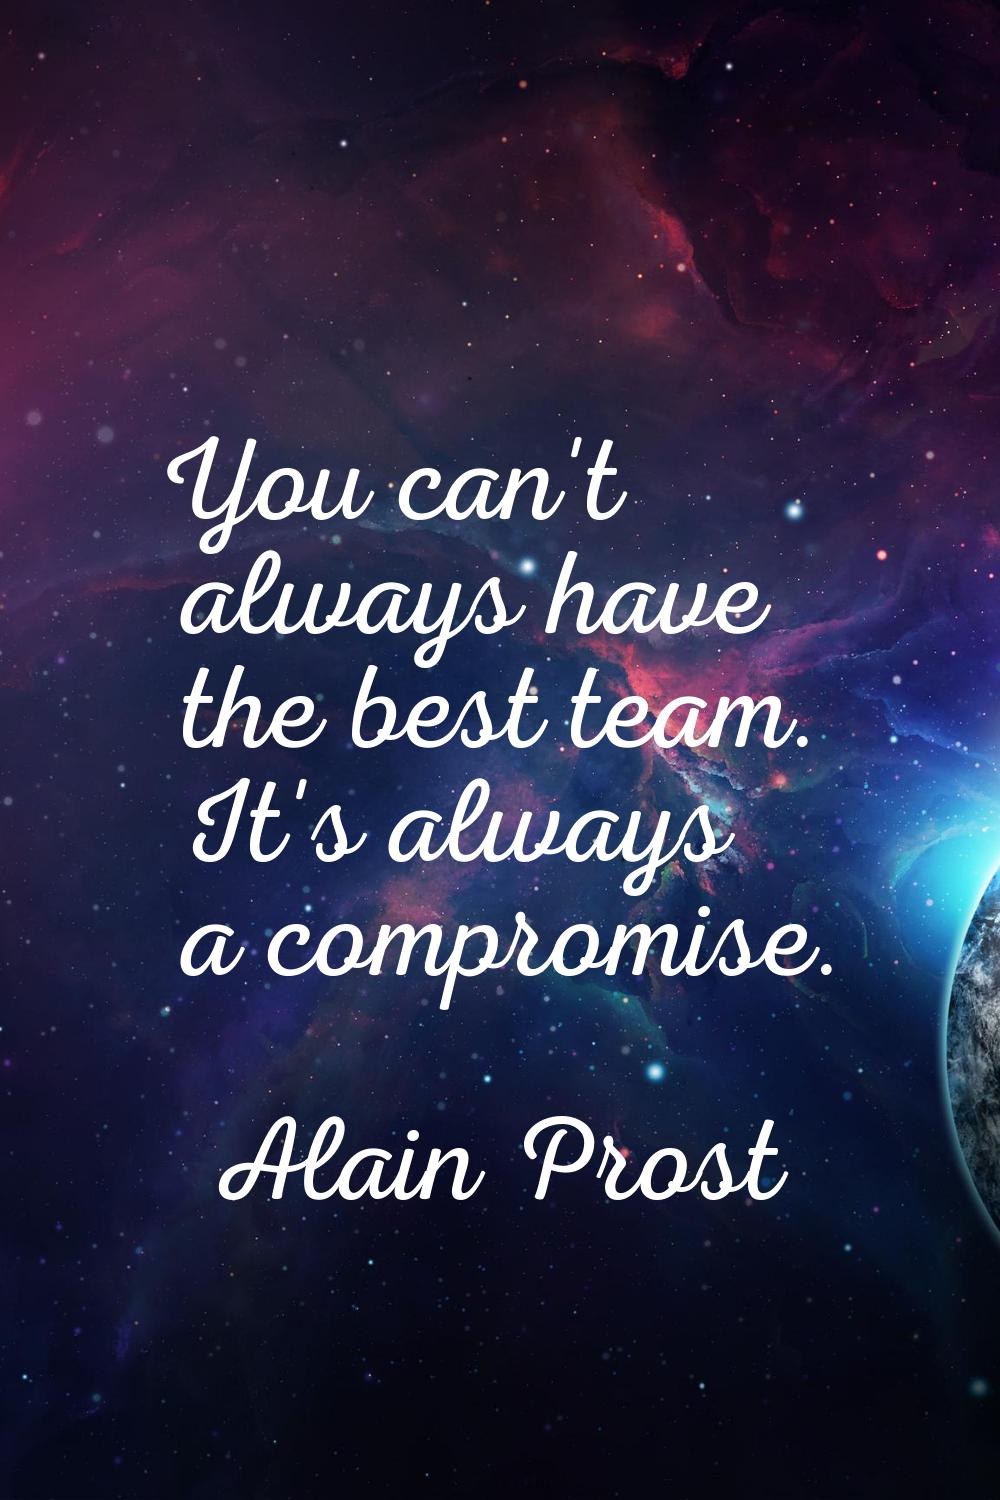 You can't always have the best team. It's always a compromise.